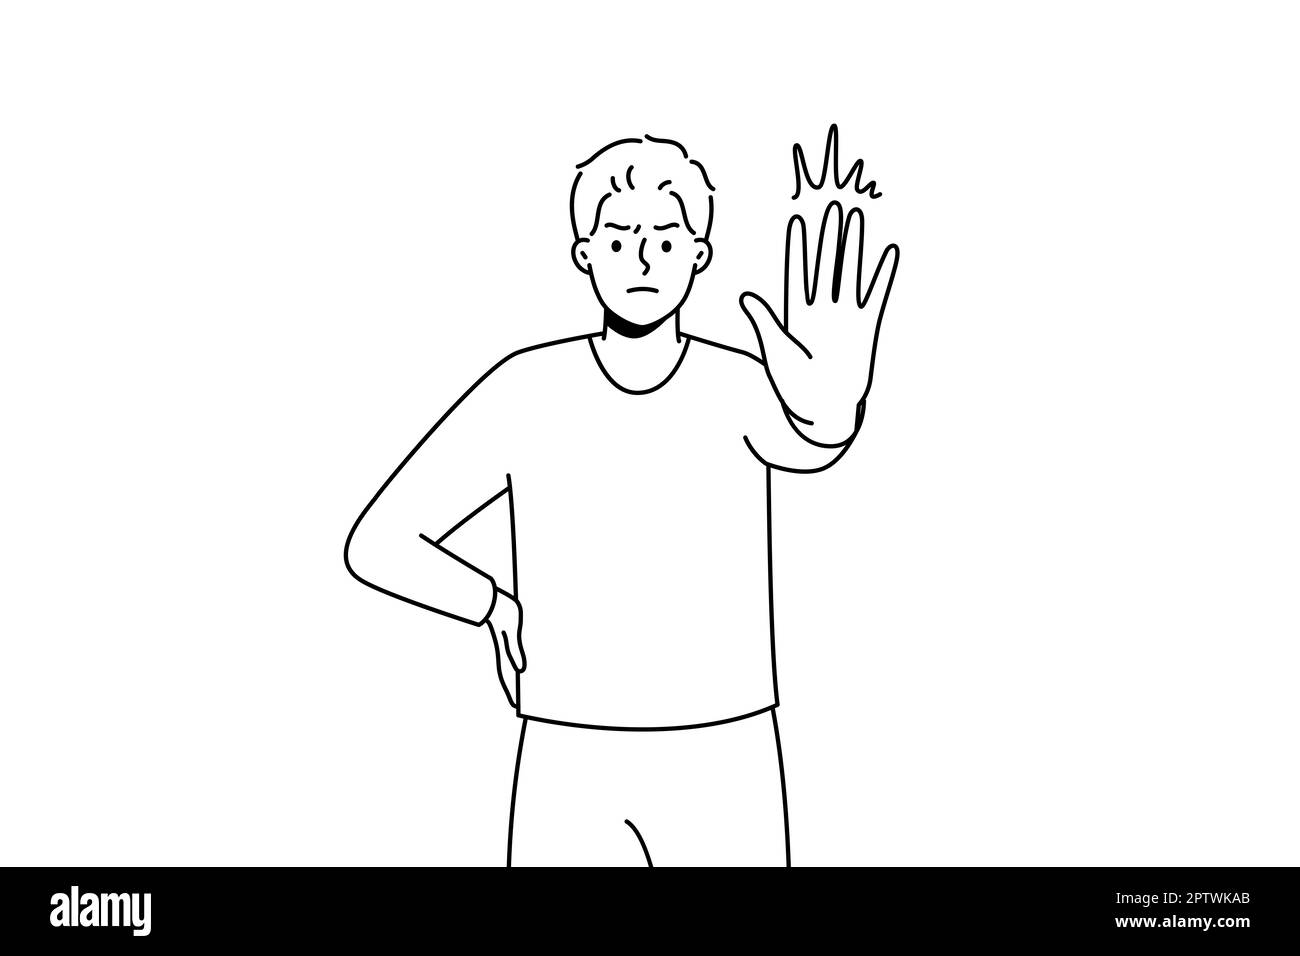 Decisive young man show no hand gesture. Serious male demonstrate stop sign. Nonverbal communication and body language. Vector illustration. Stock Photo